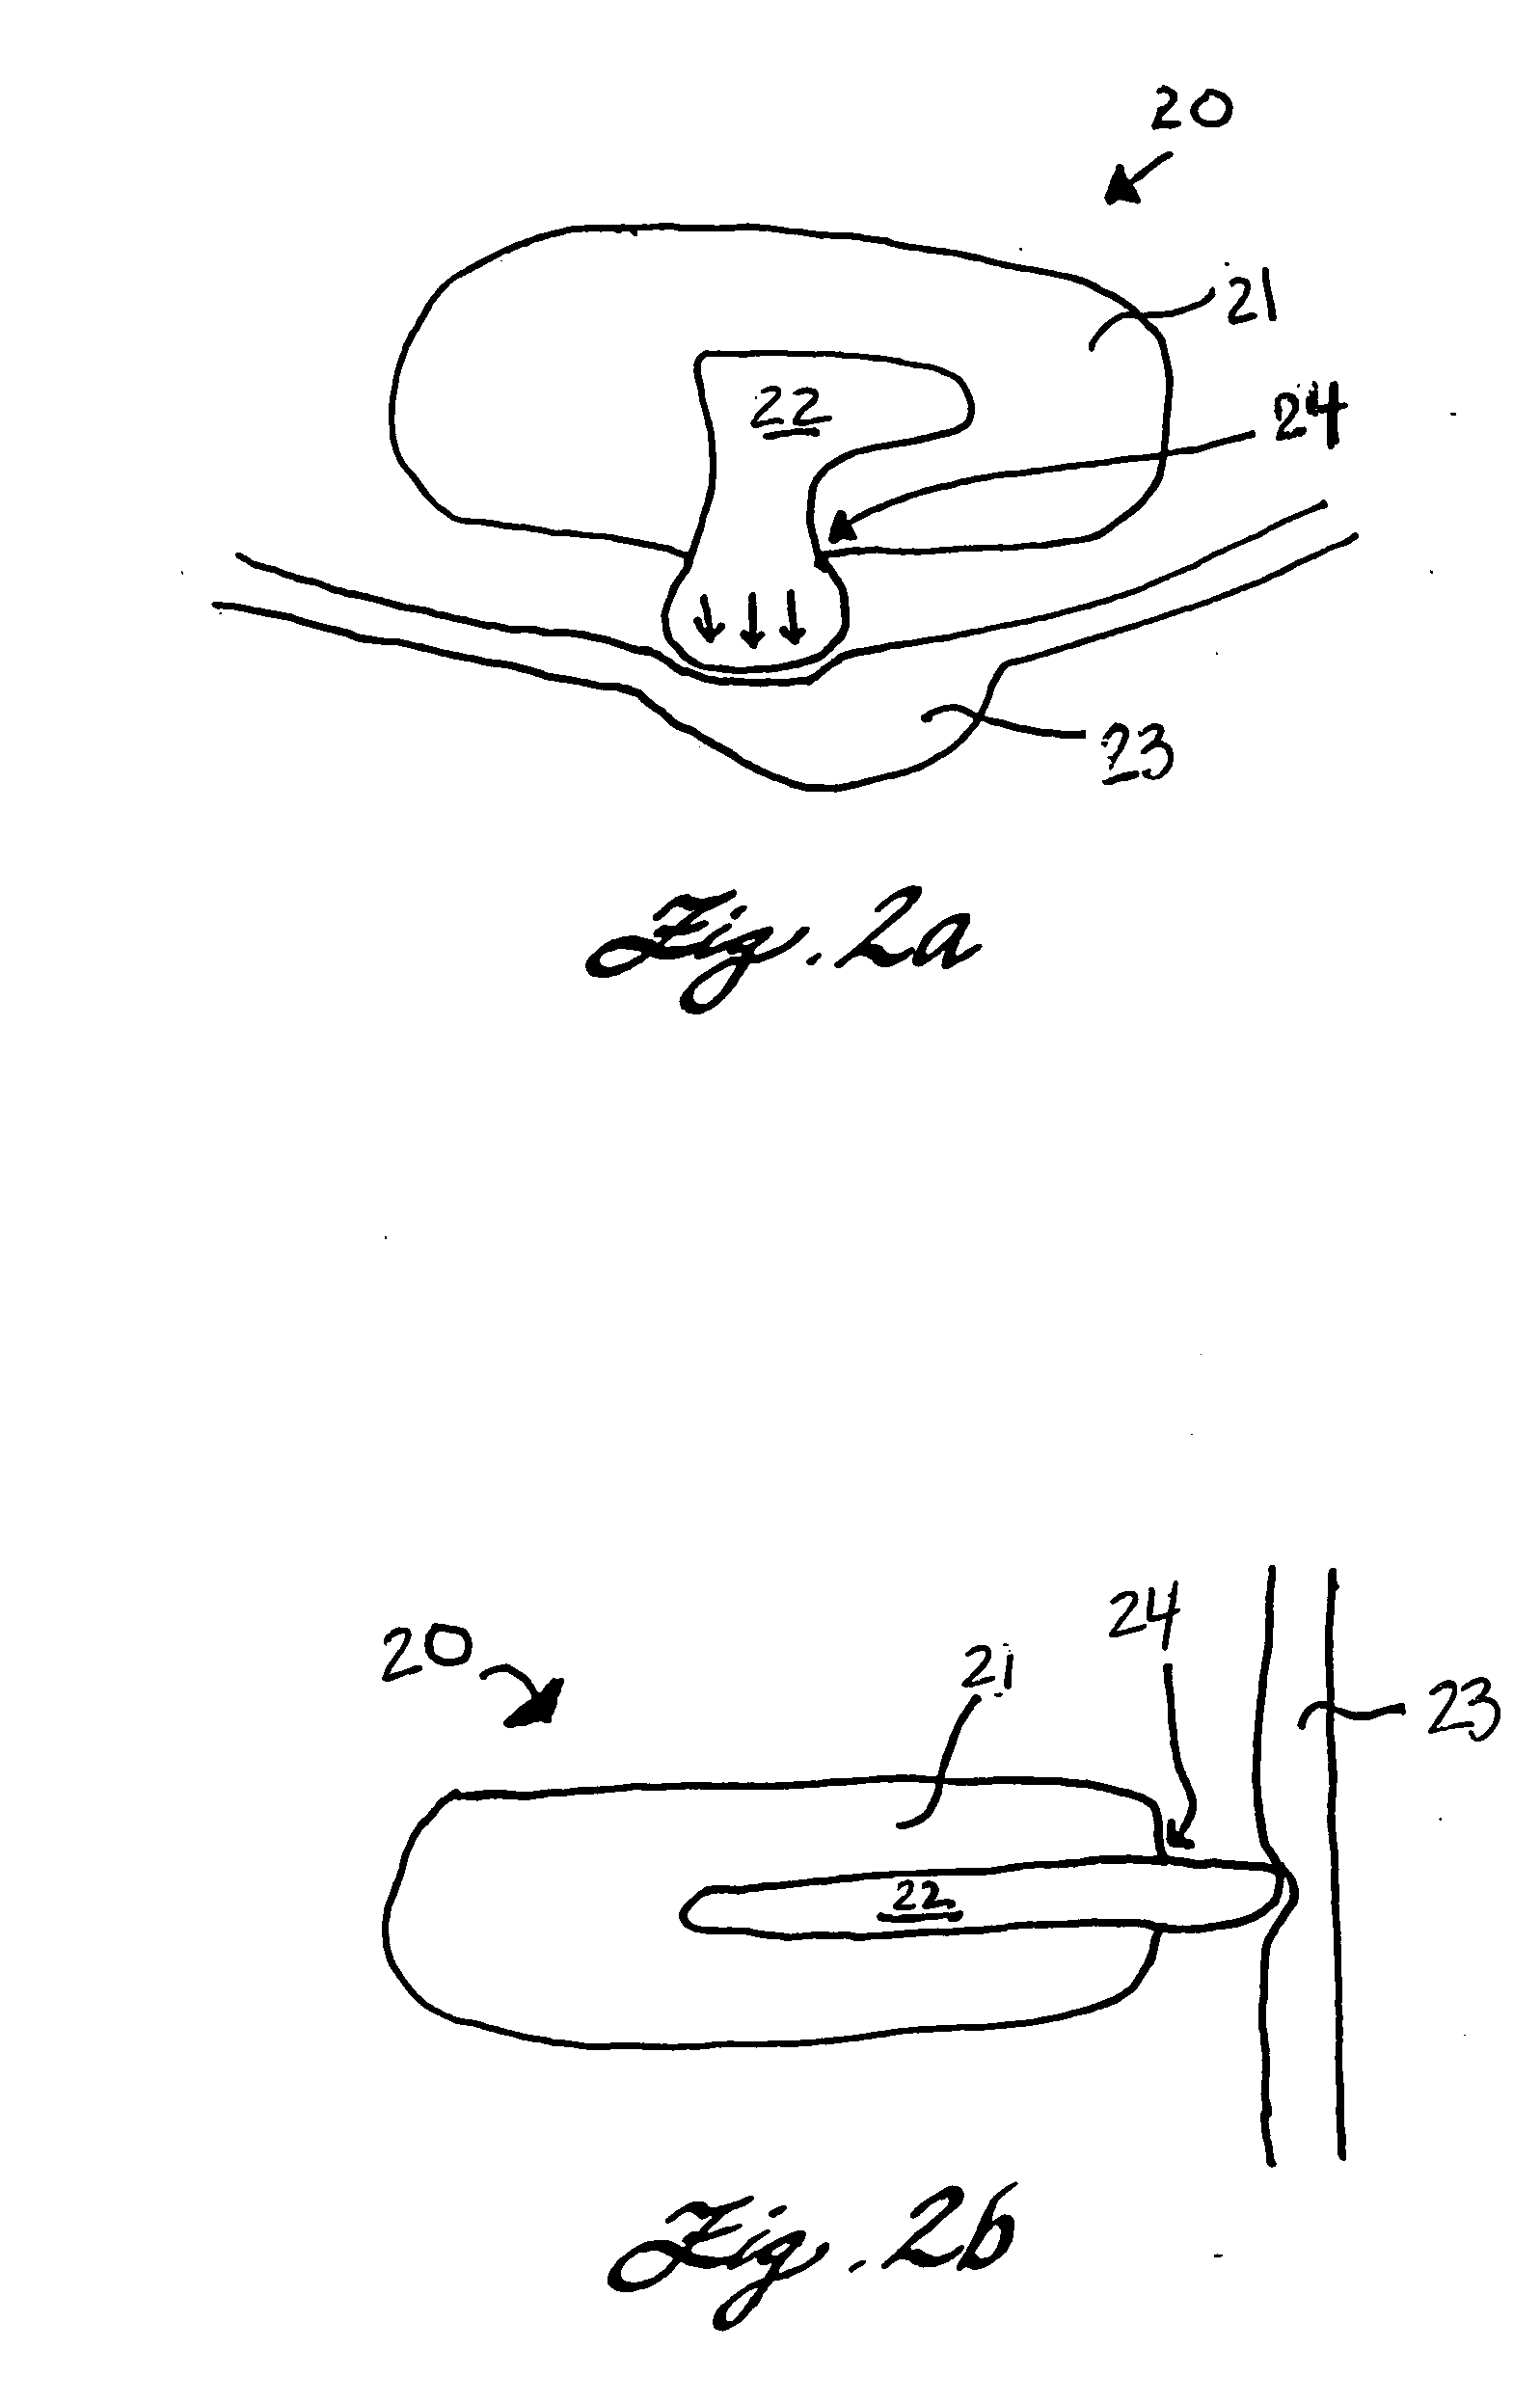 Expandable implant for repairing a defect in a nucleus of an intervertebral disc